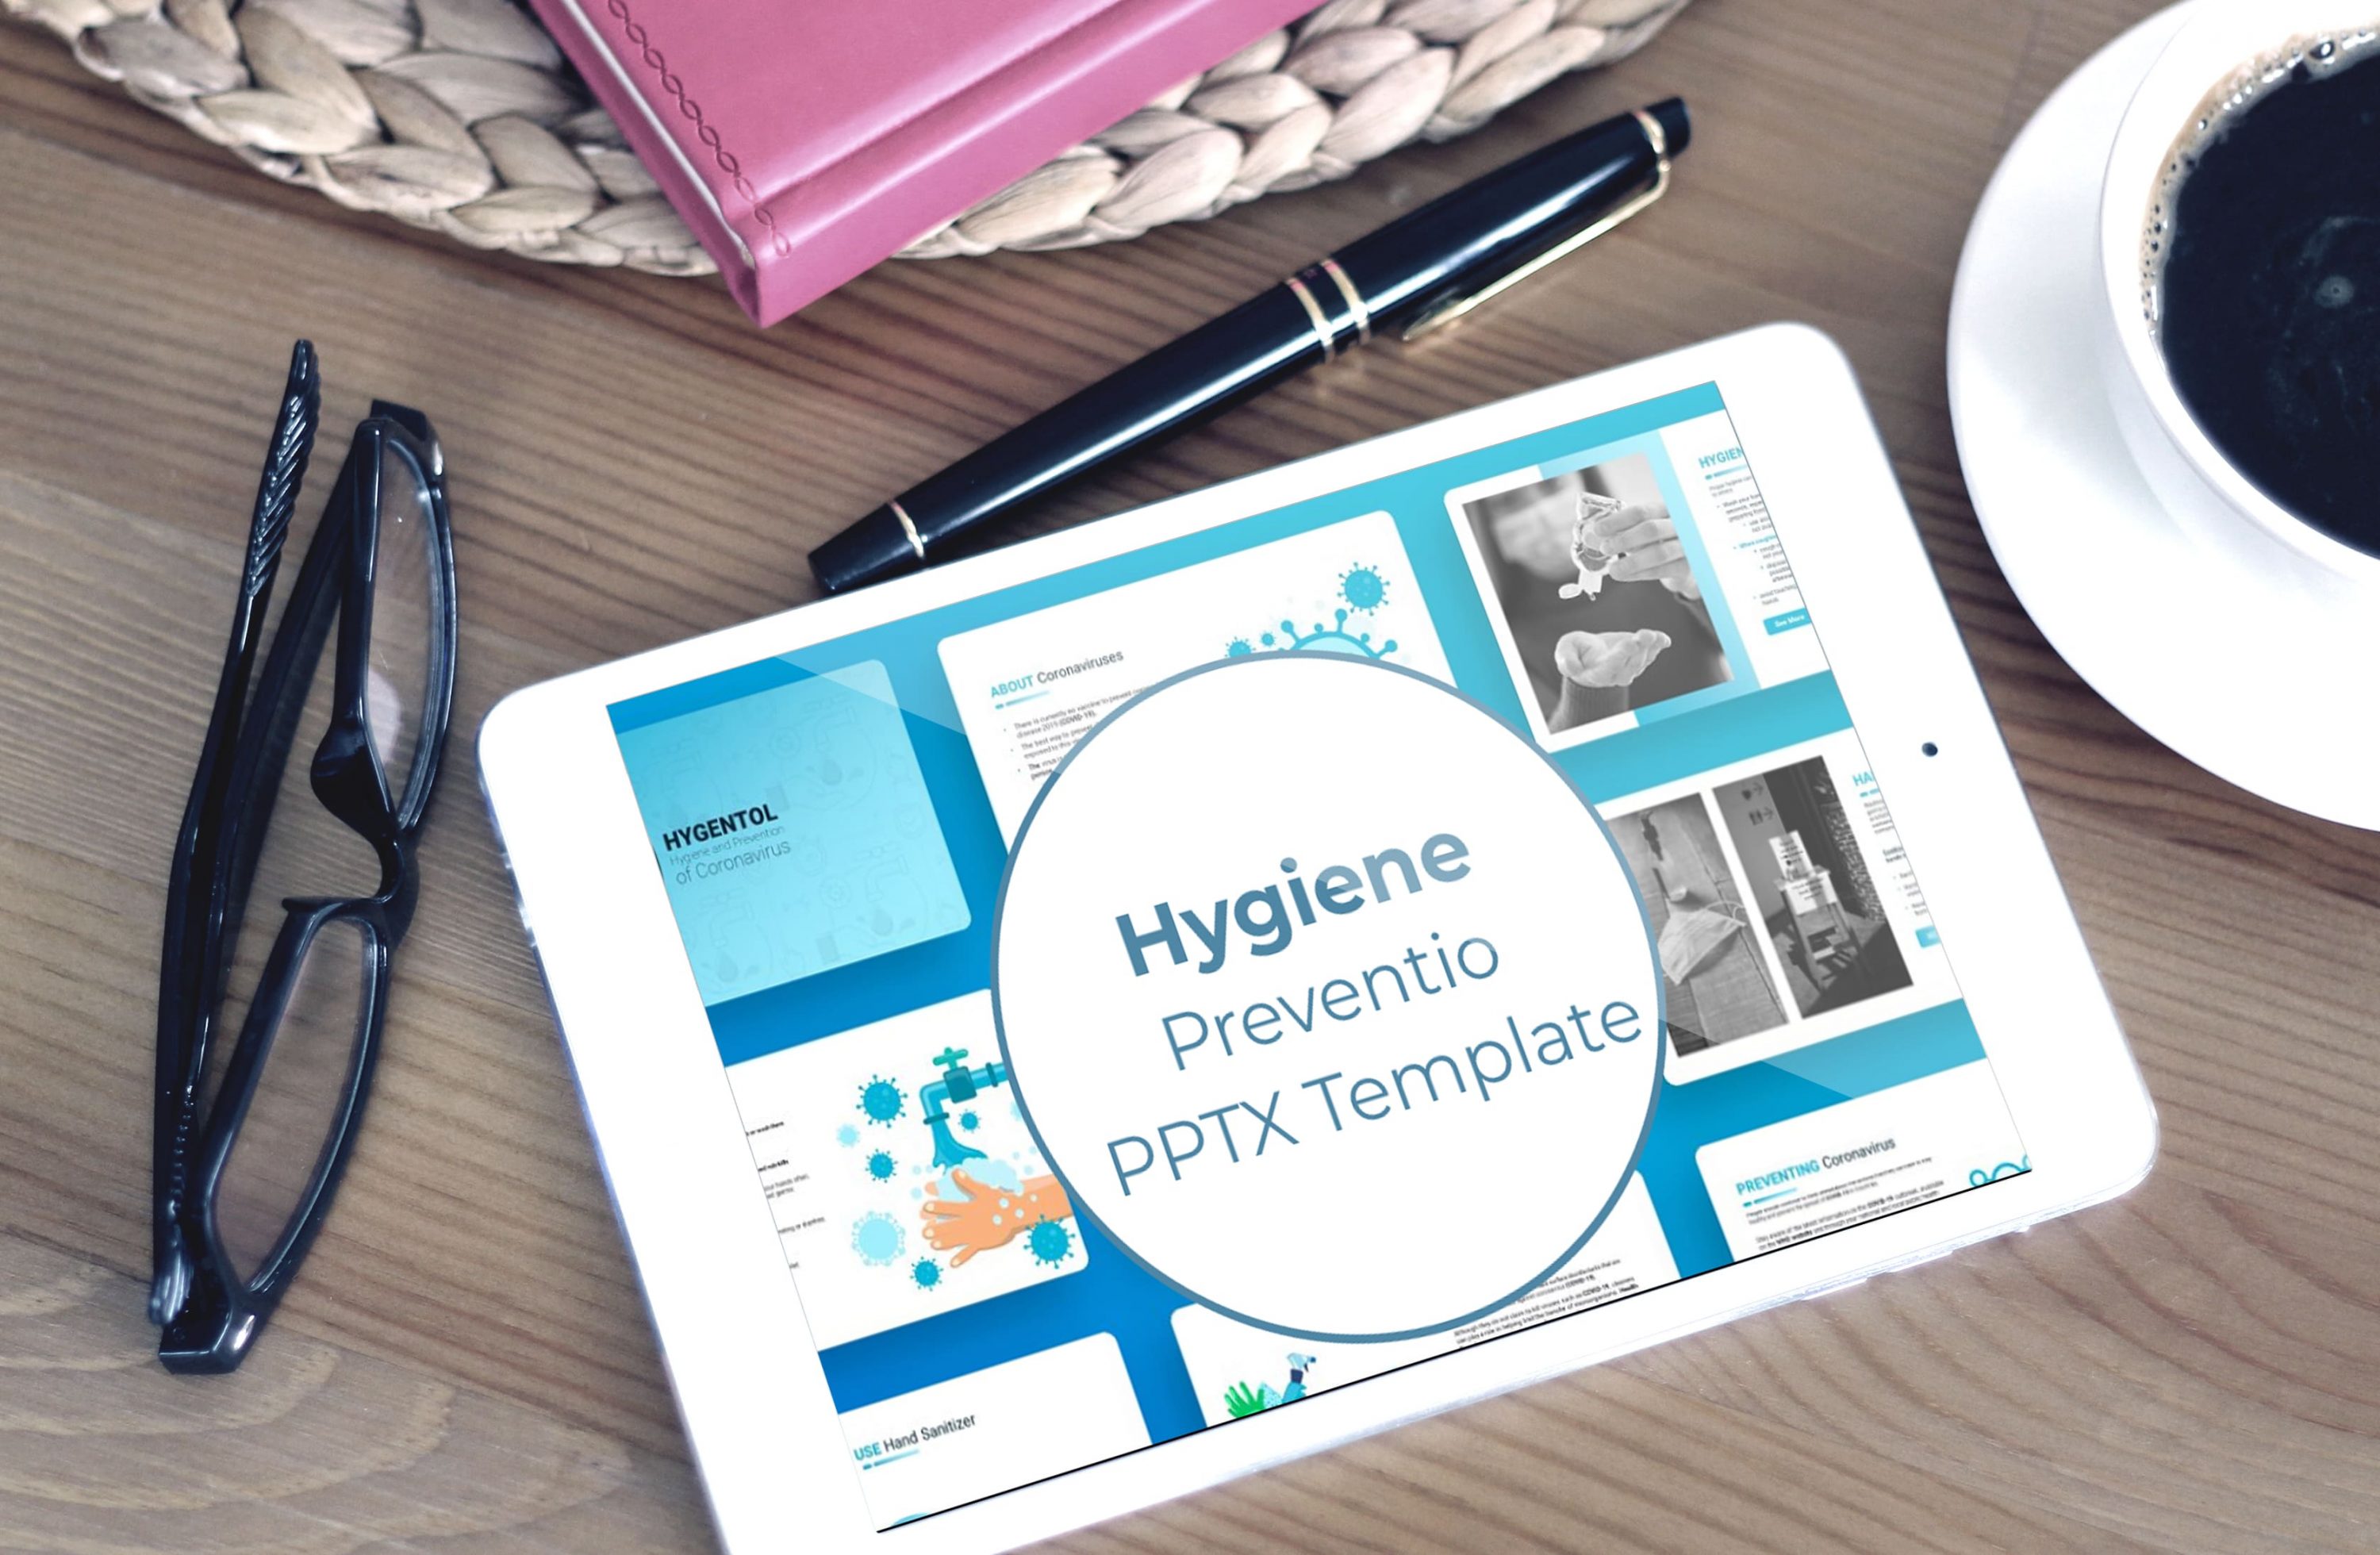 Tablet option of the Hygiene Prevention PPTX Template.